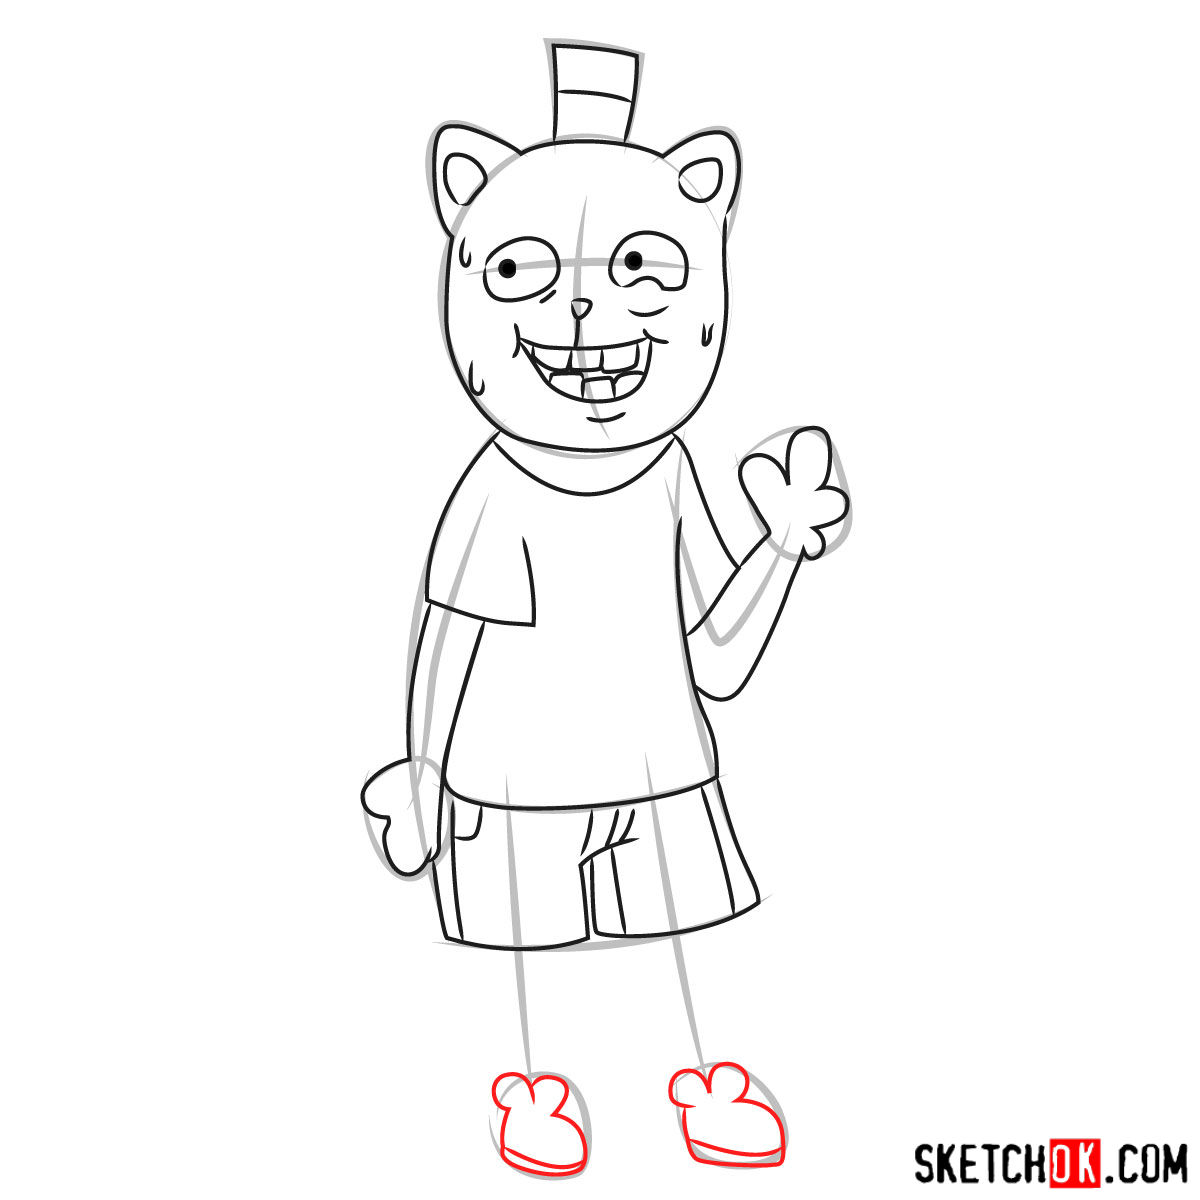 How to draw Burgerpants from Undertale - step 08